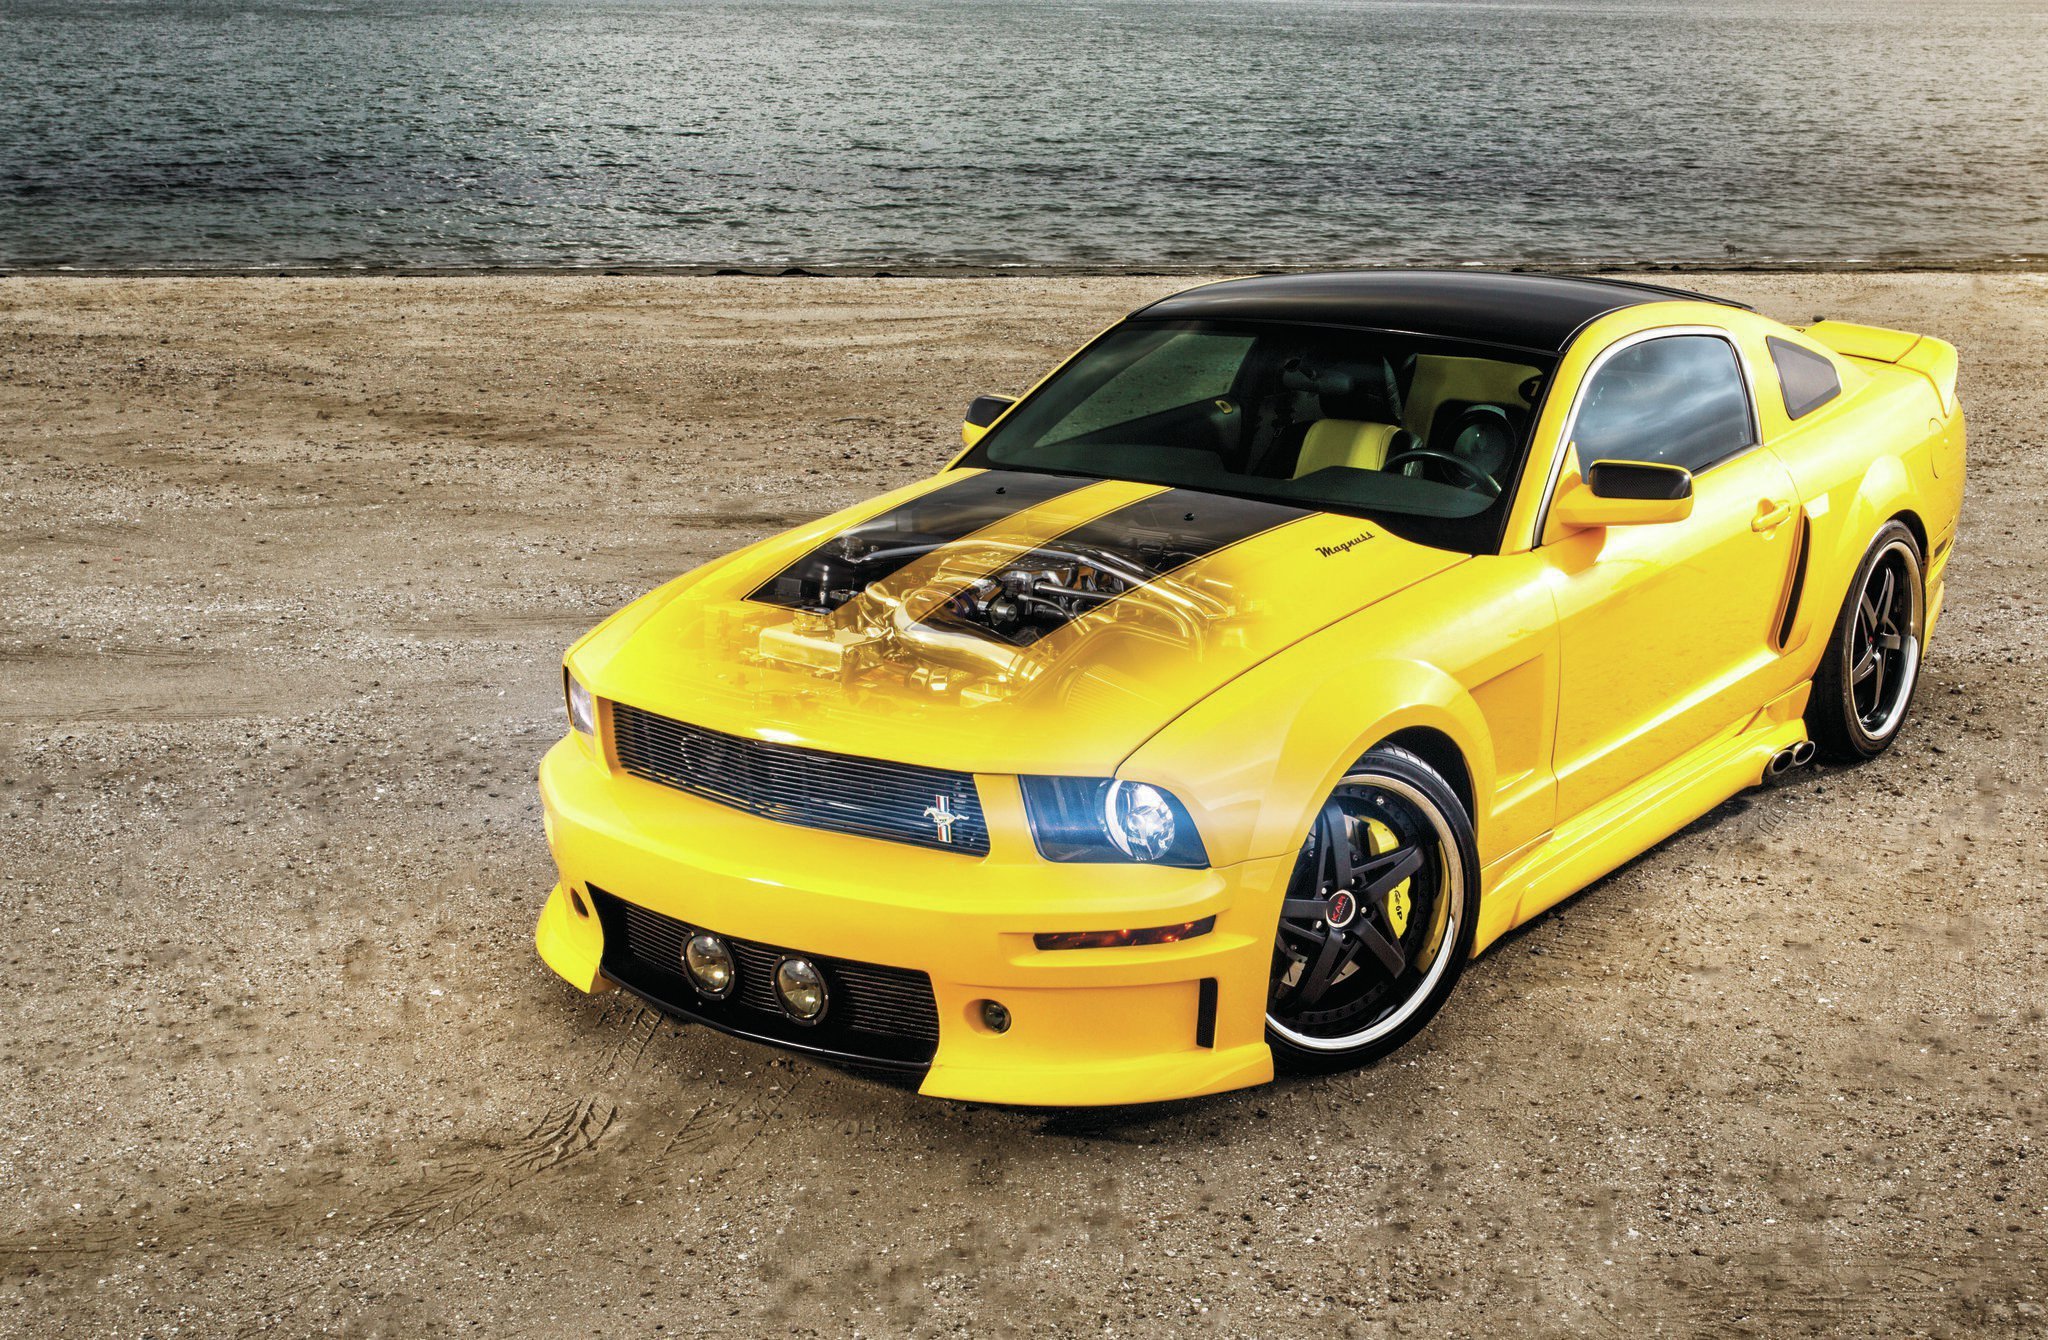 2008, Ford, Mustang, Muscle, Pro, Touring, Suoper, Street, Rodder, Rod, Hot, Usa, 2048x1340 01 Wallpaper